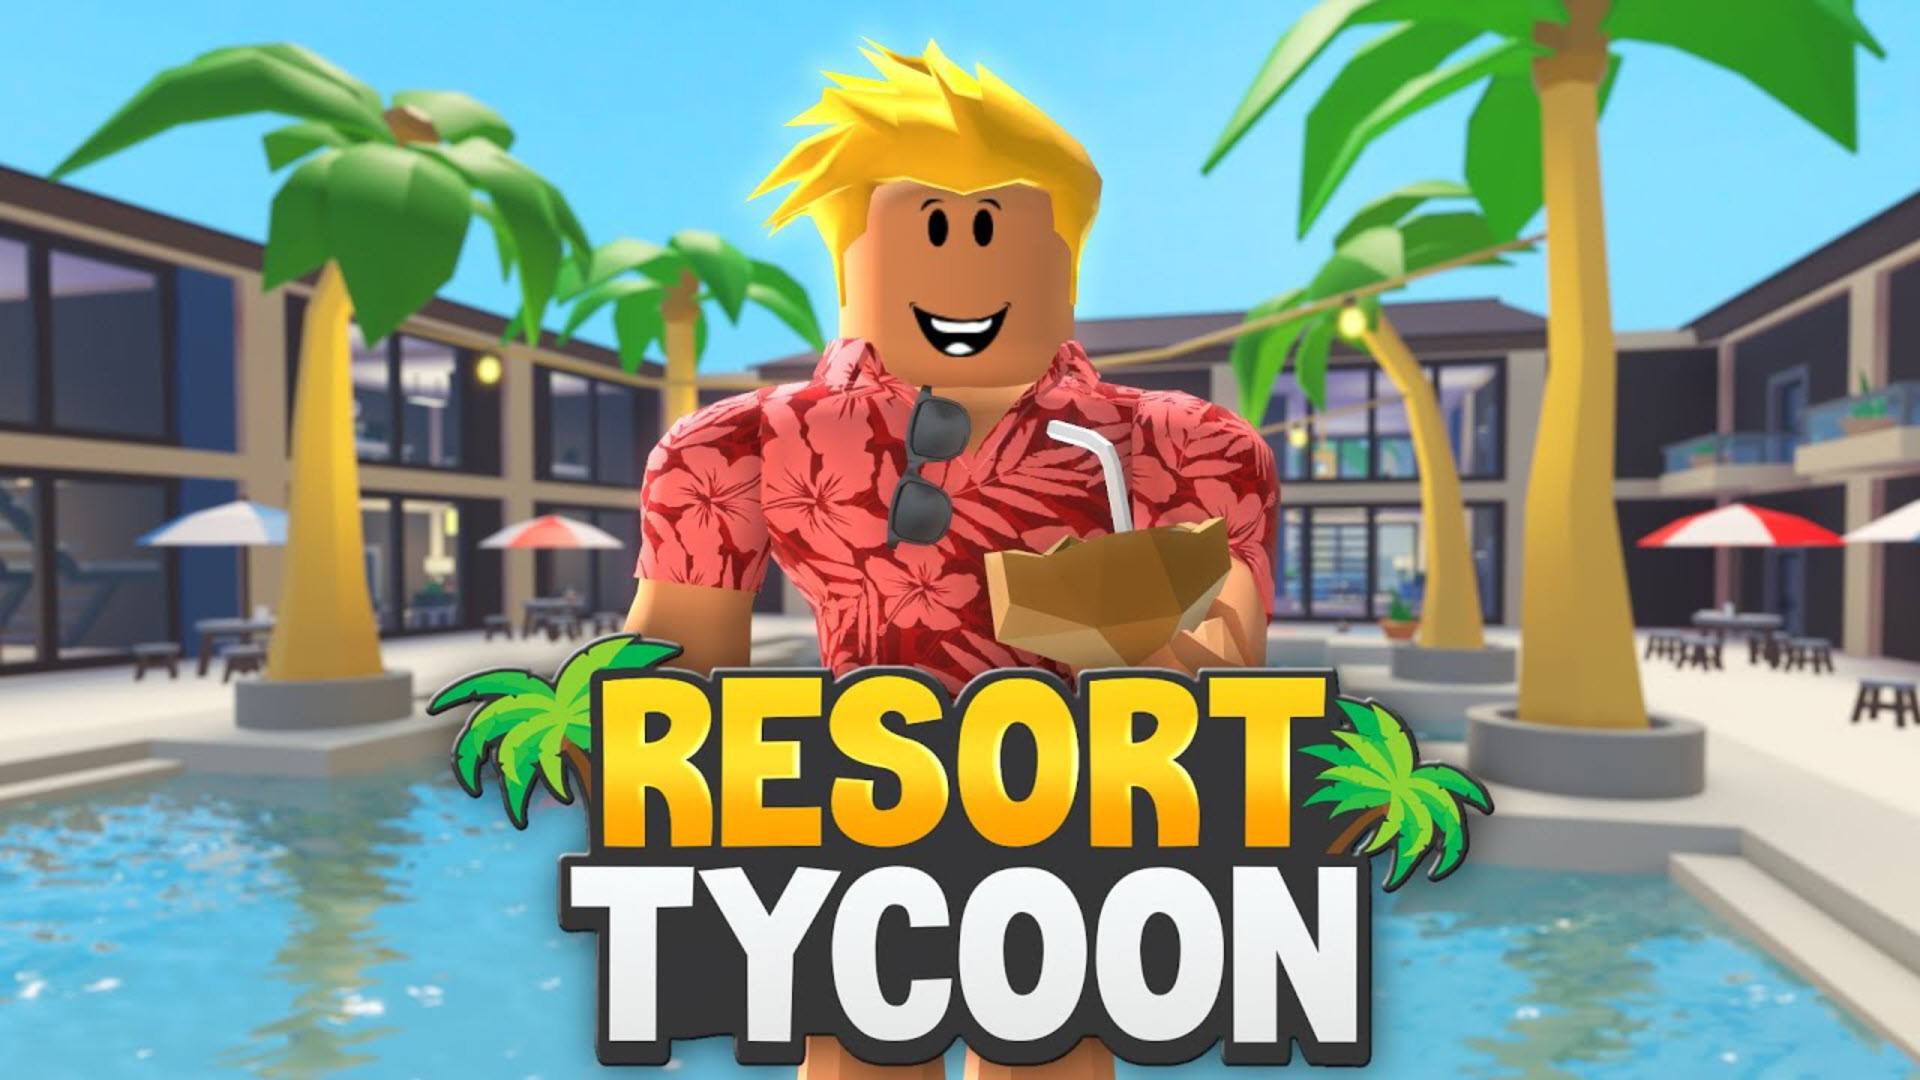 New Roblox Tropical Resort Tycoon Codes Jul 2021 Super Easy - roblox tycoon codes